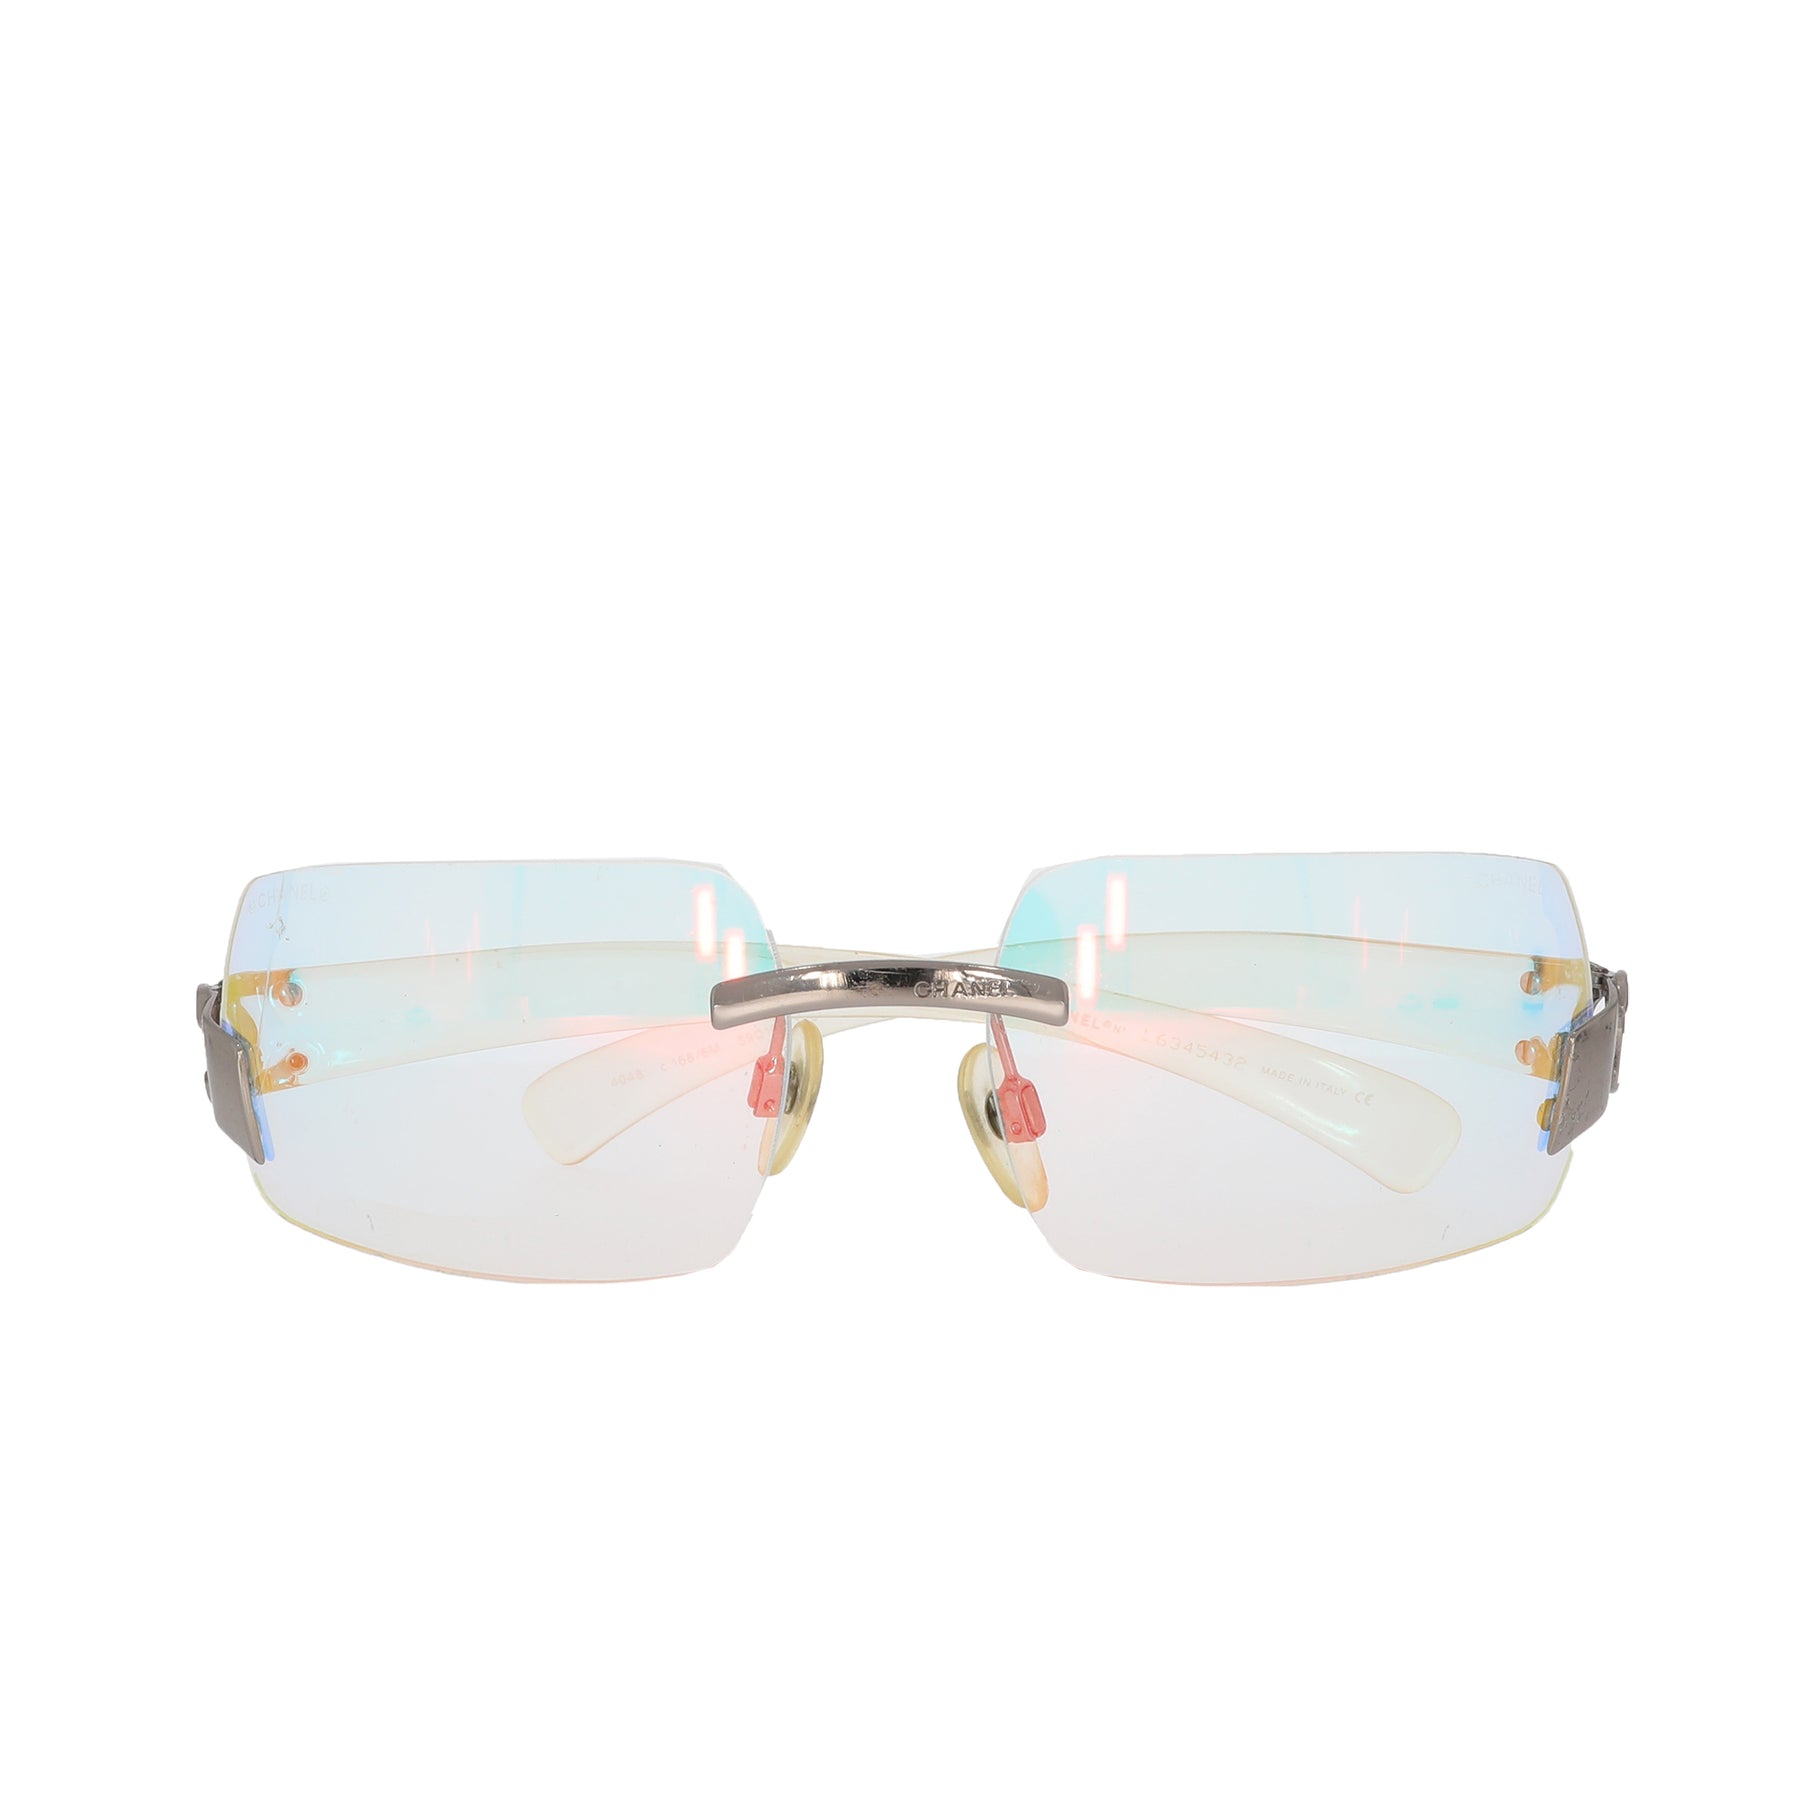 Chanel Rimless Sunglasses Featuring Small Crystal Logos  Italy  QUIET WEST